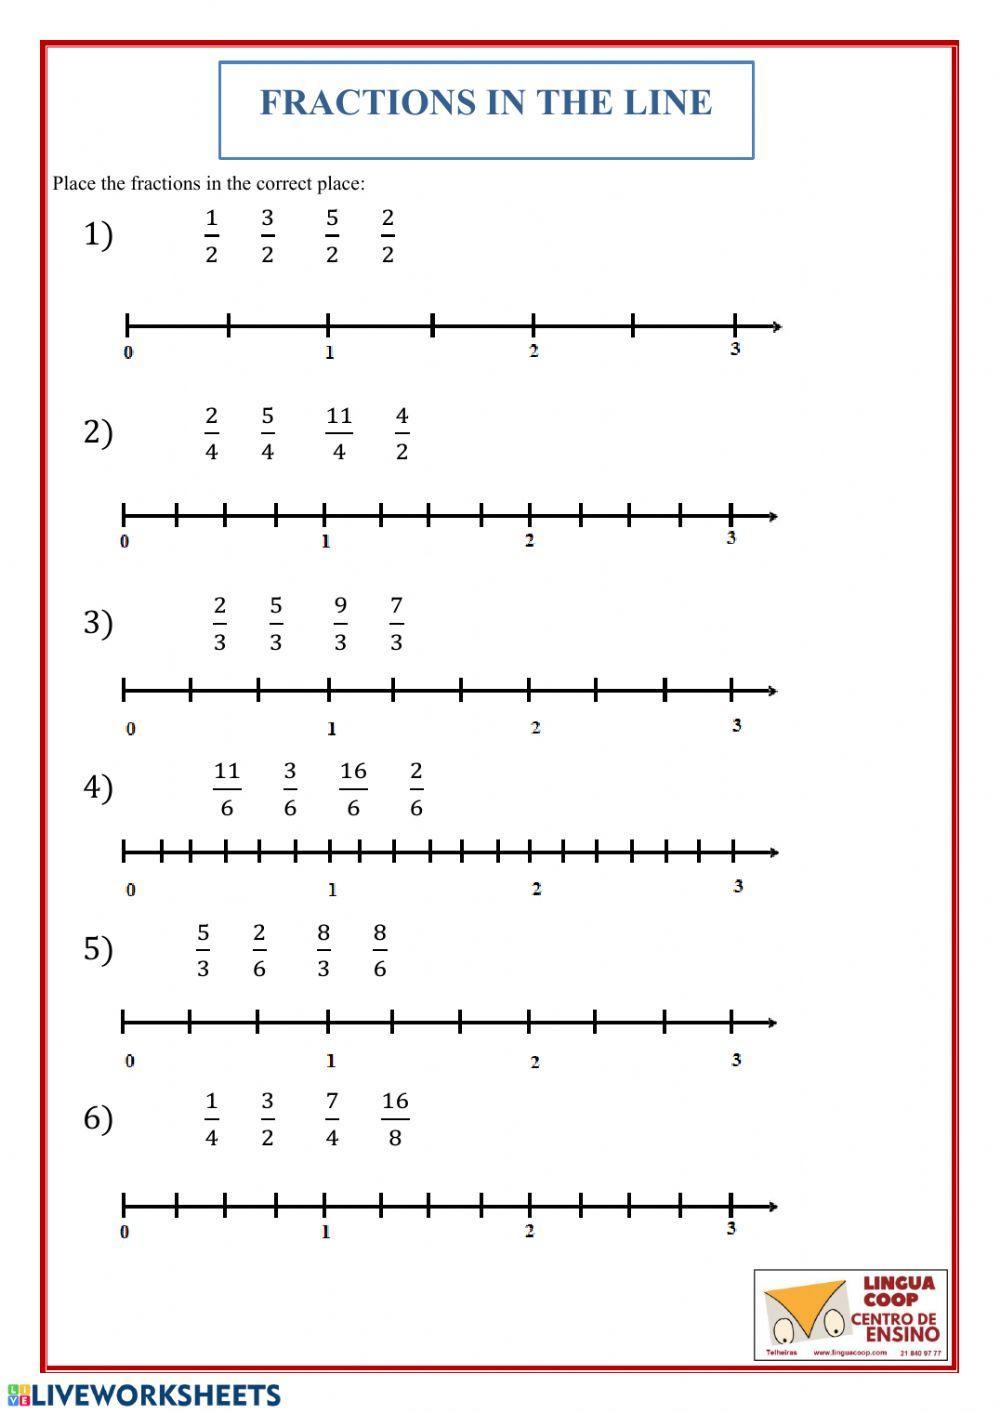 Fractions in the line